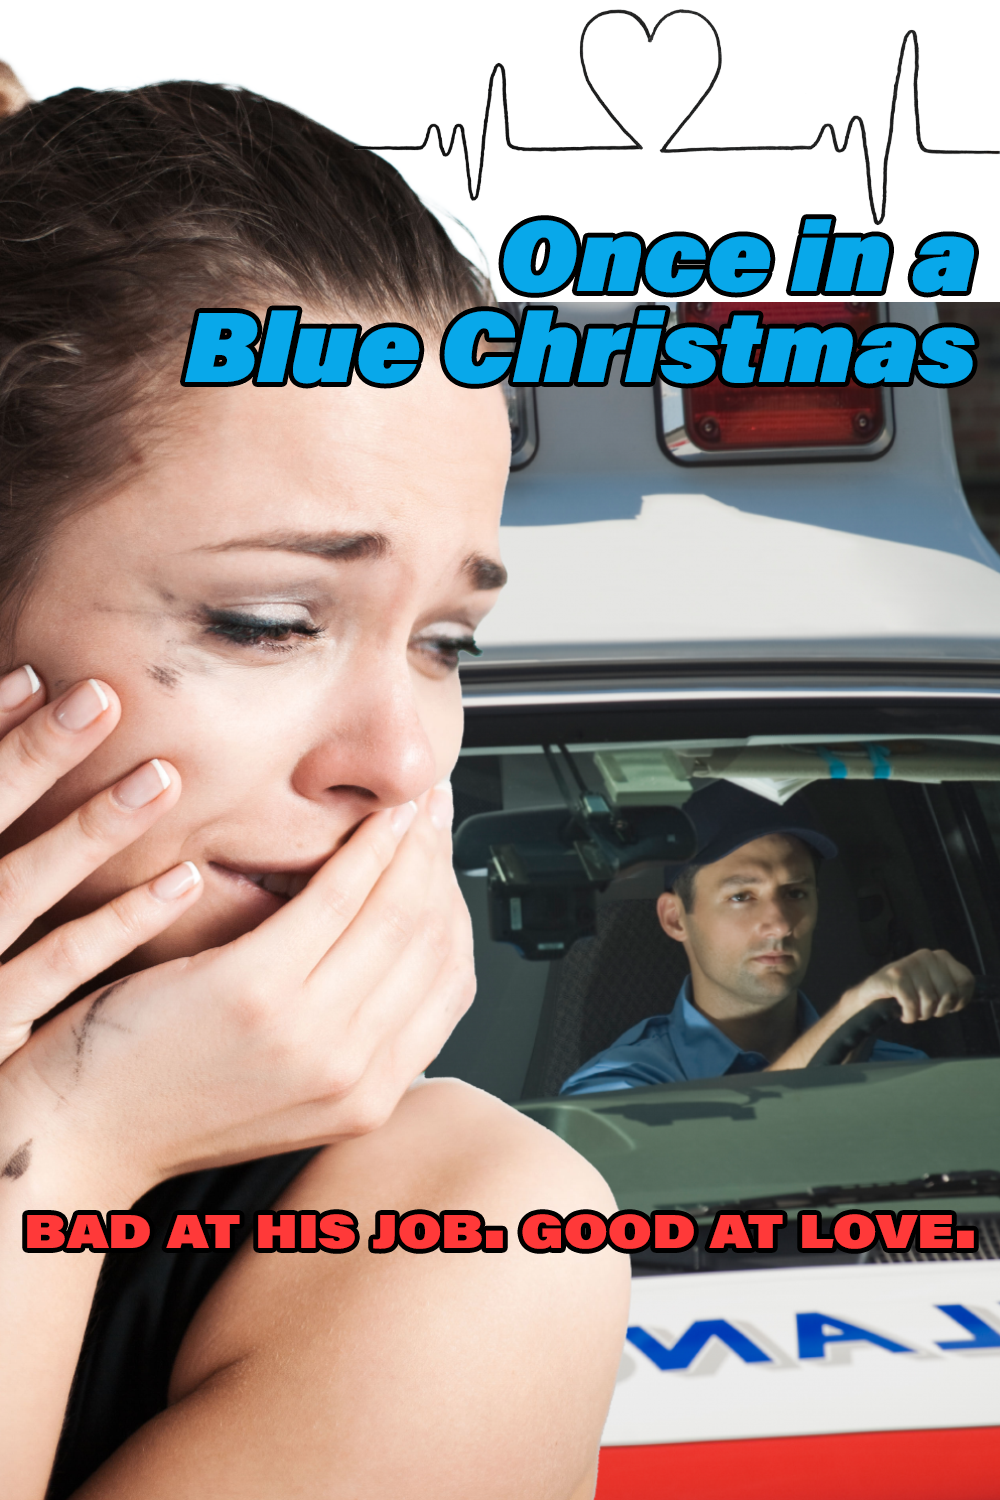 Once in a Blue Christmas